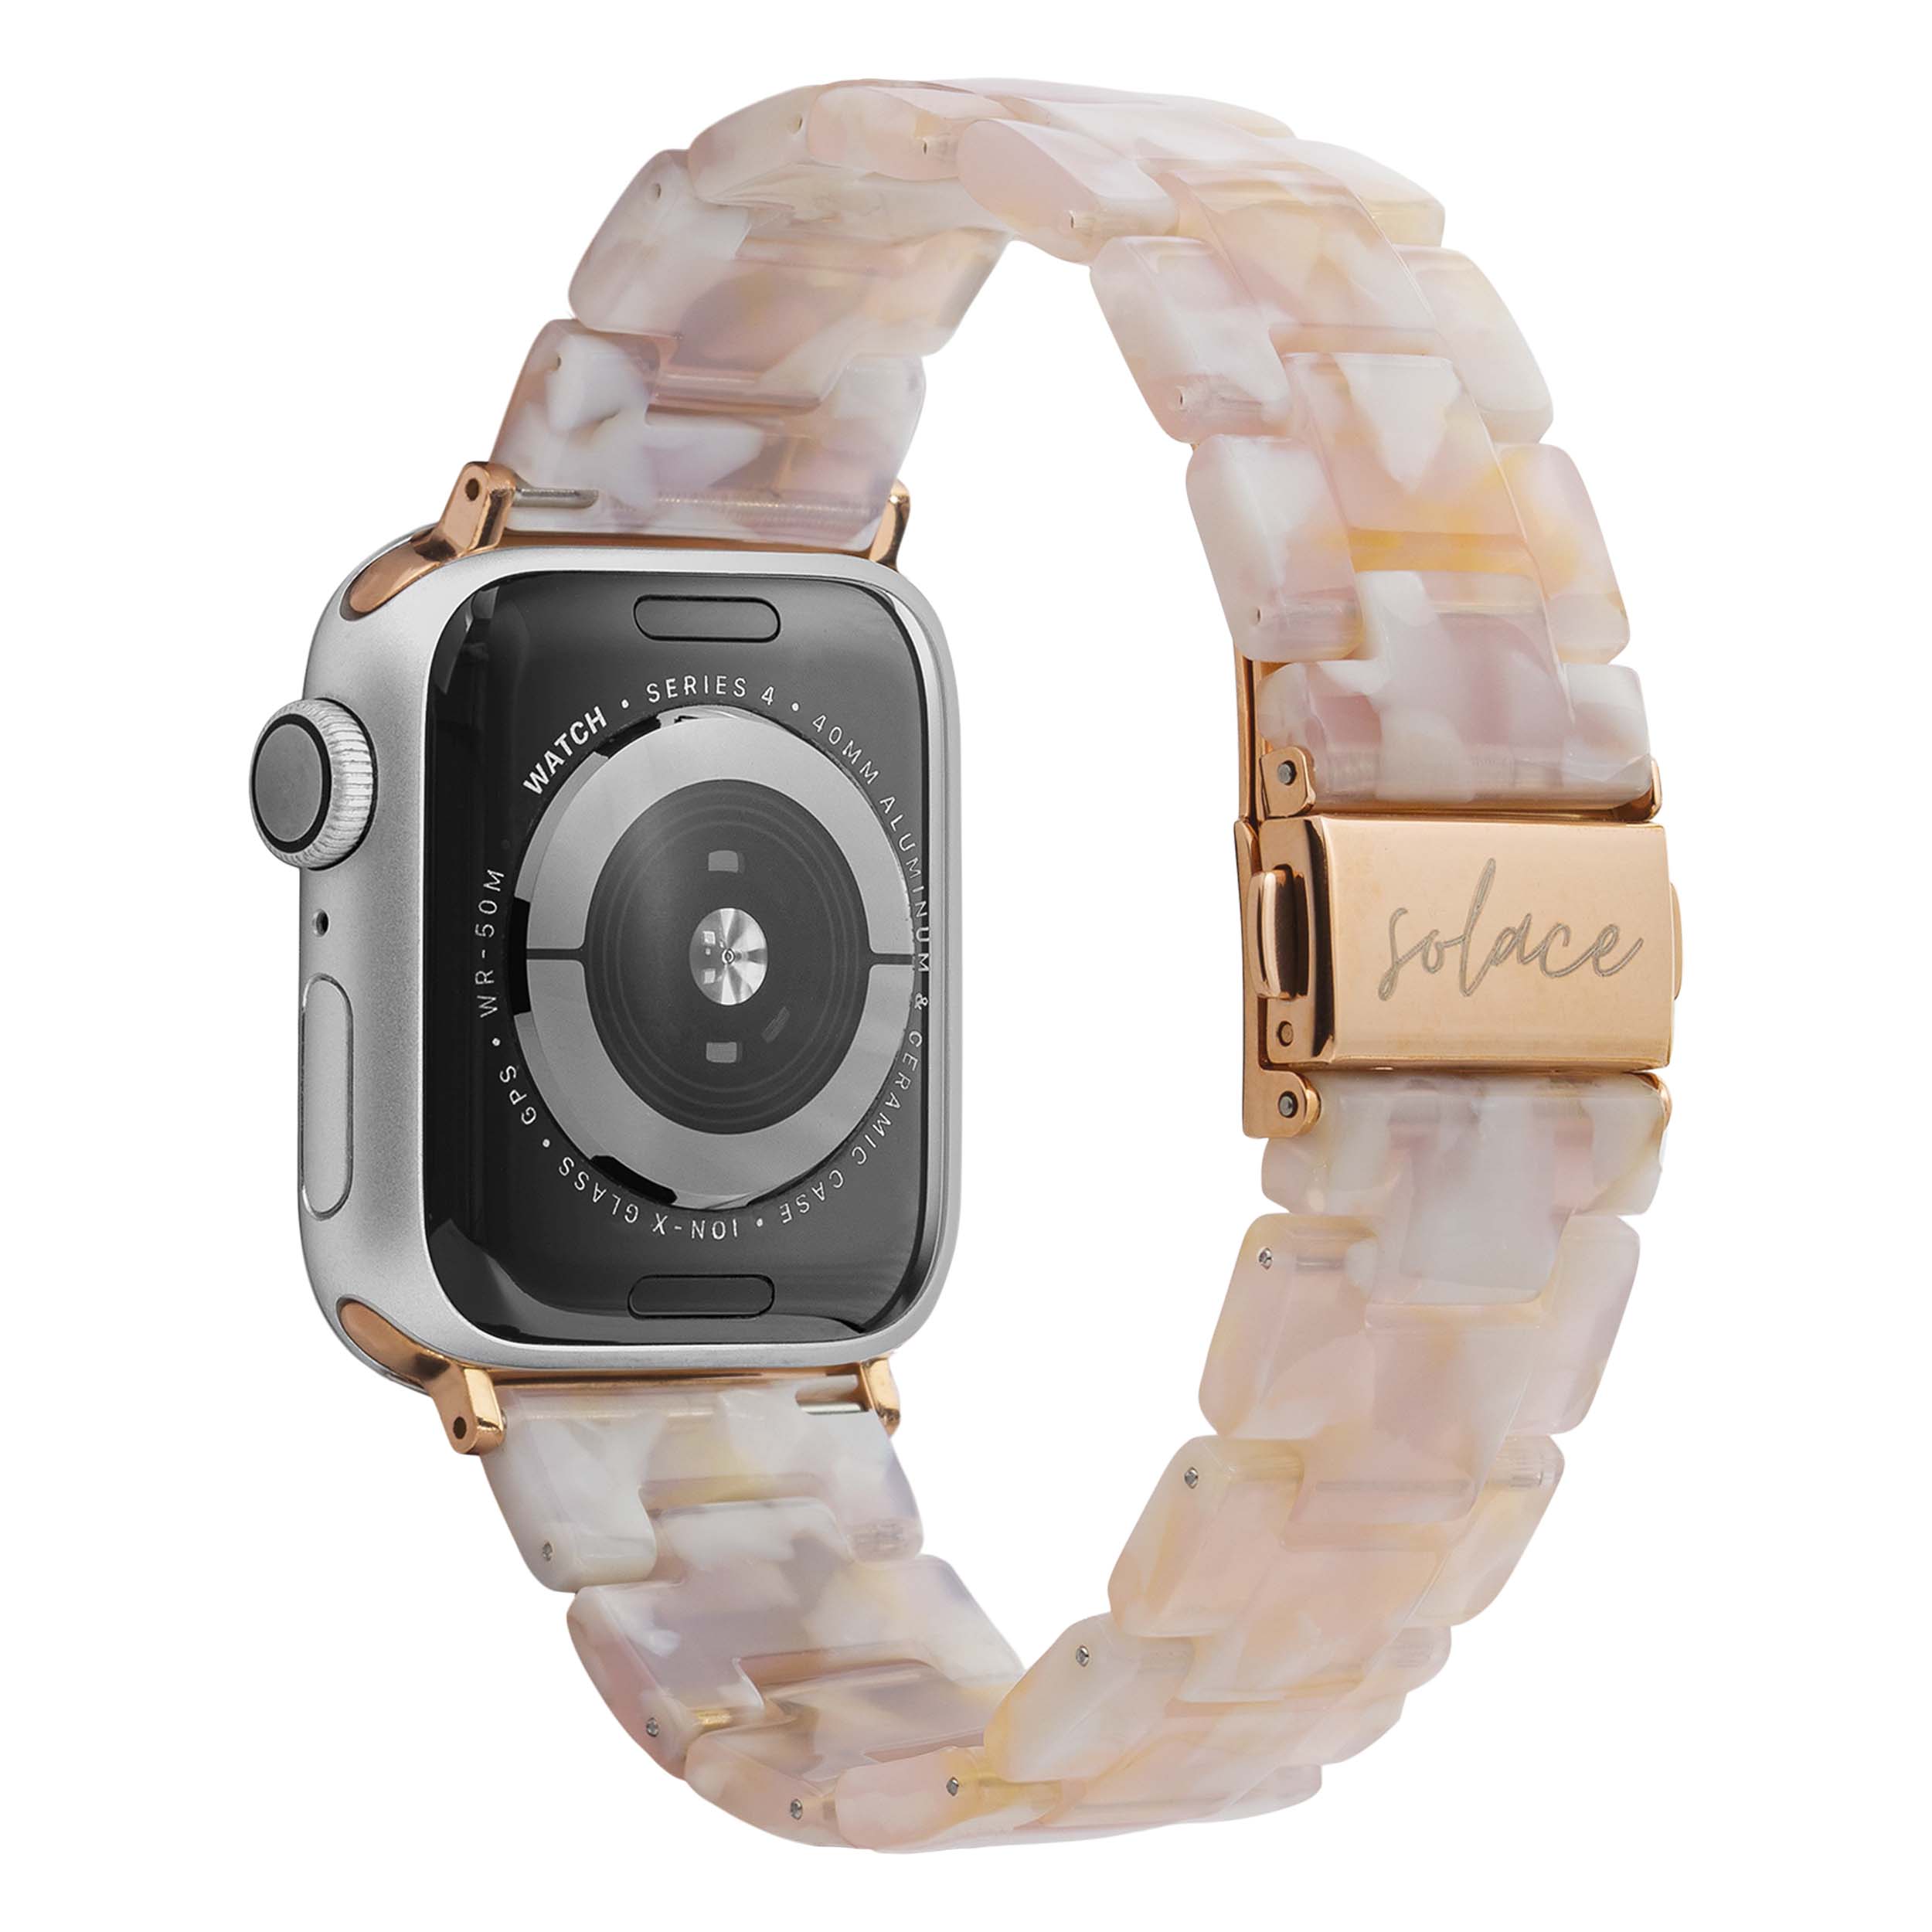 SolaceBands Resin Apple Watch Band